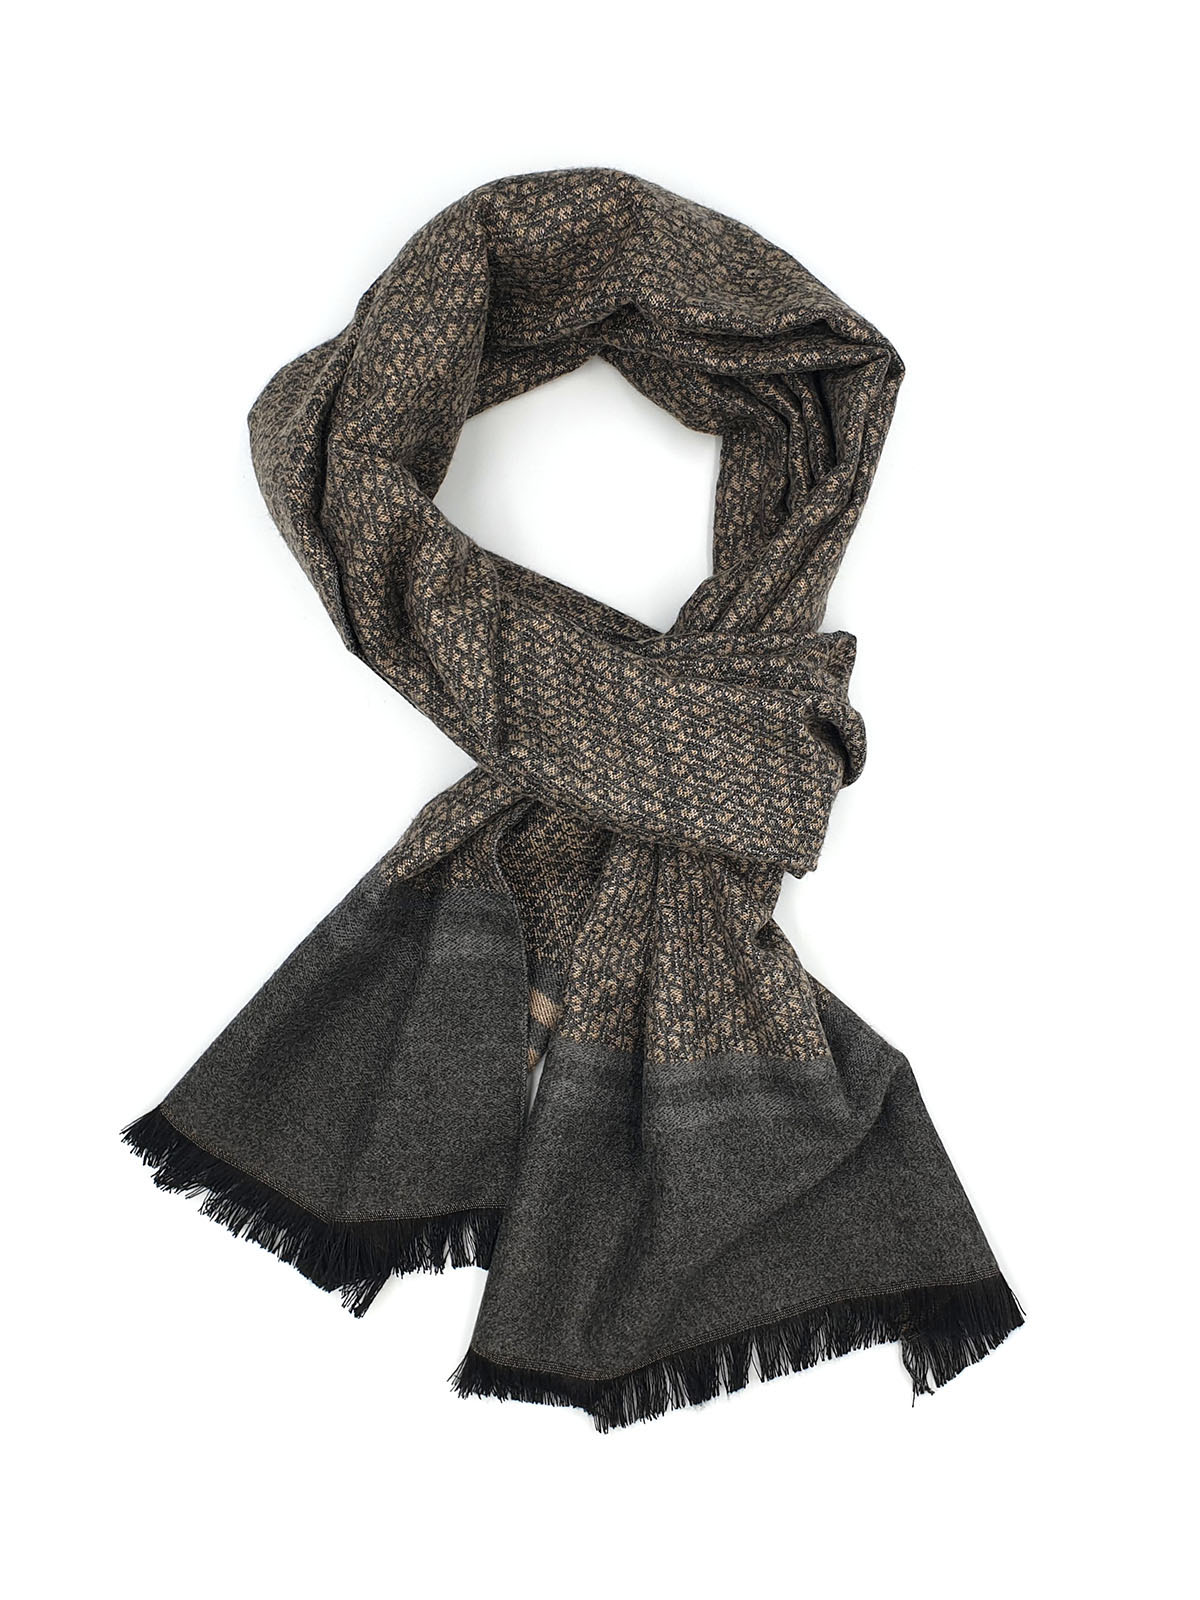 Gray and beige patterned scarf - 10324 - € 19.68 img4